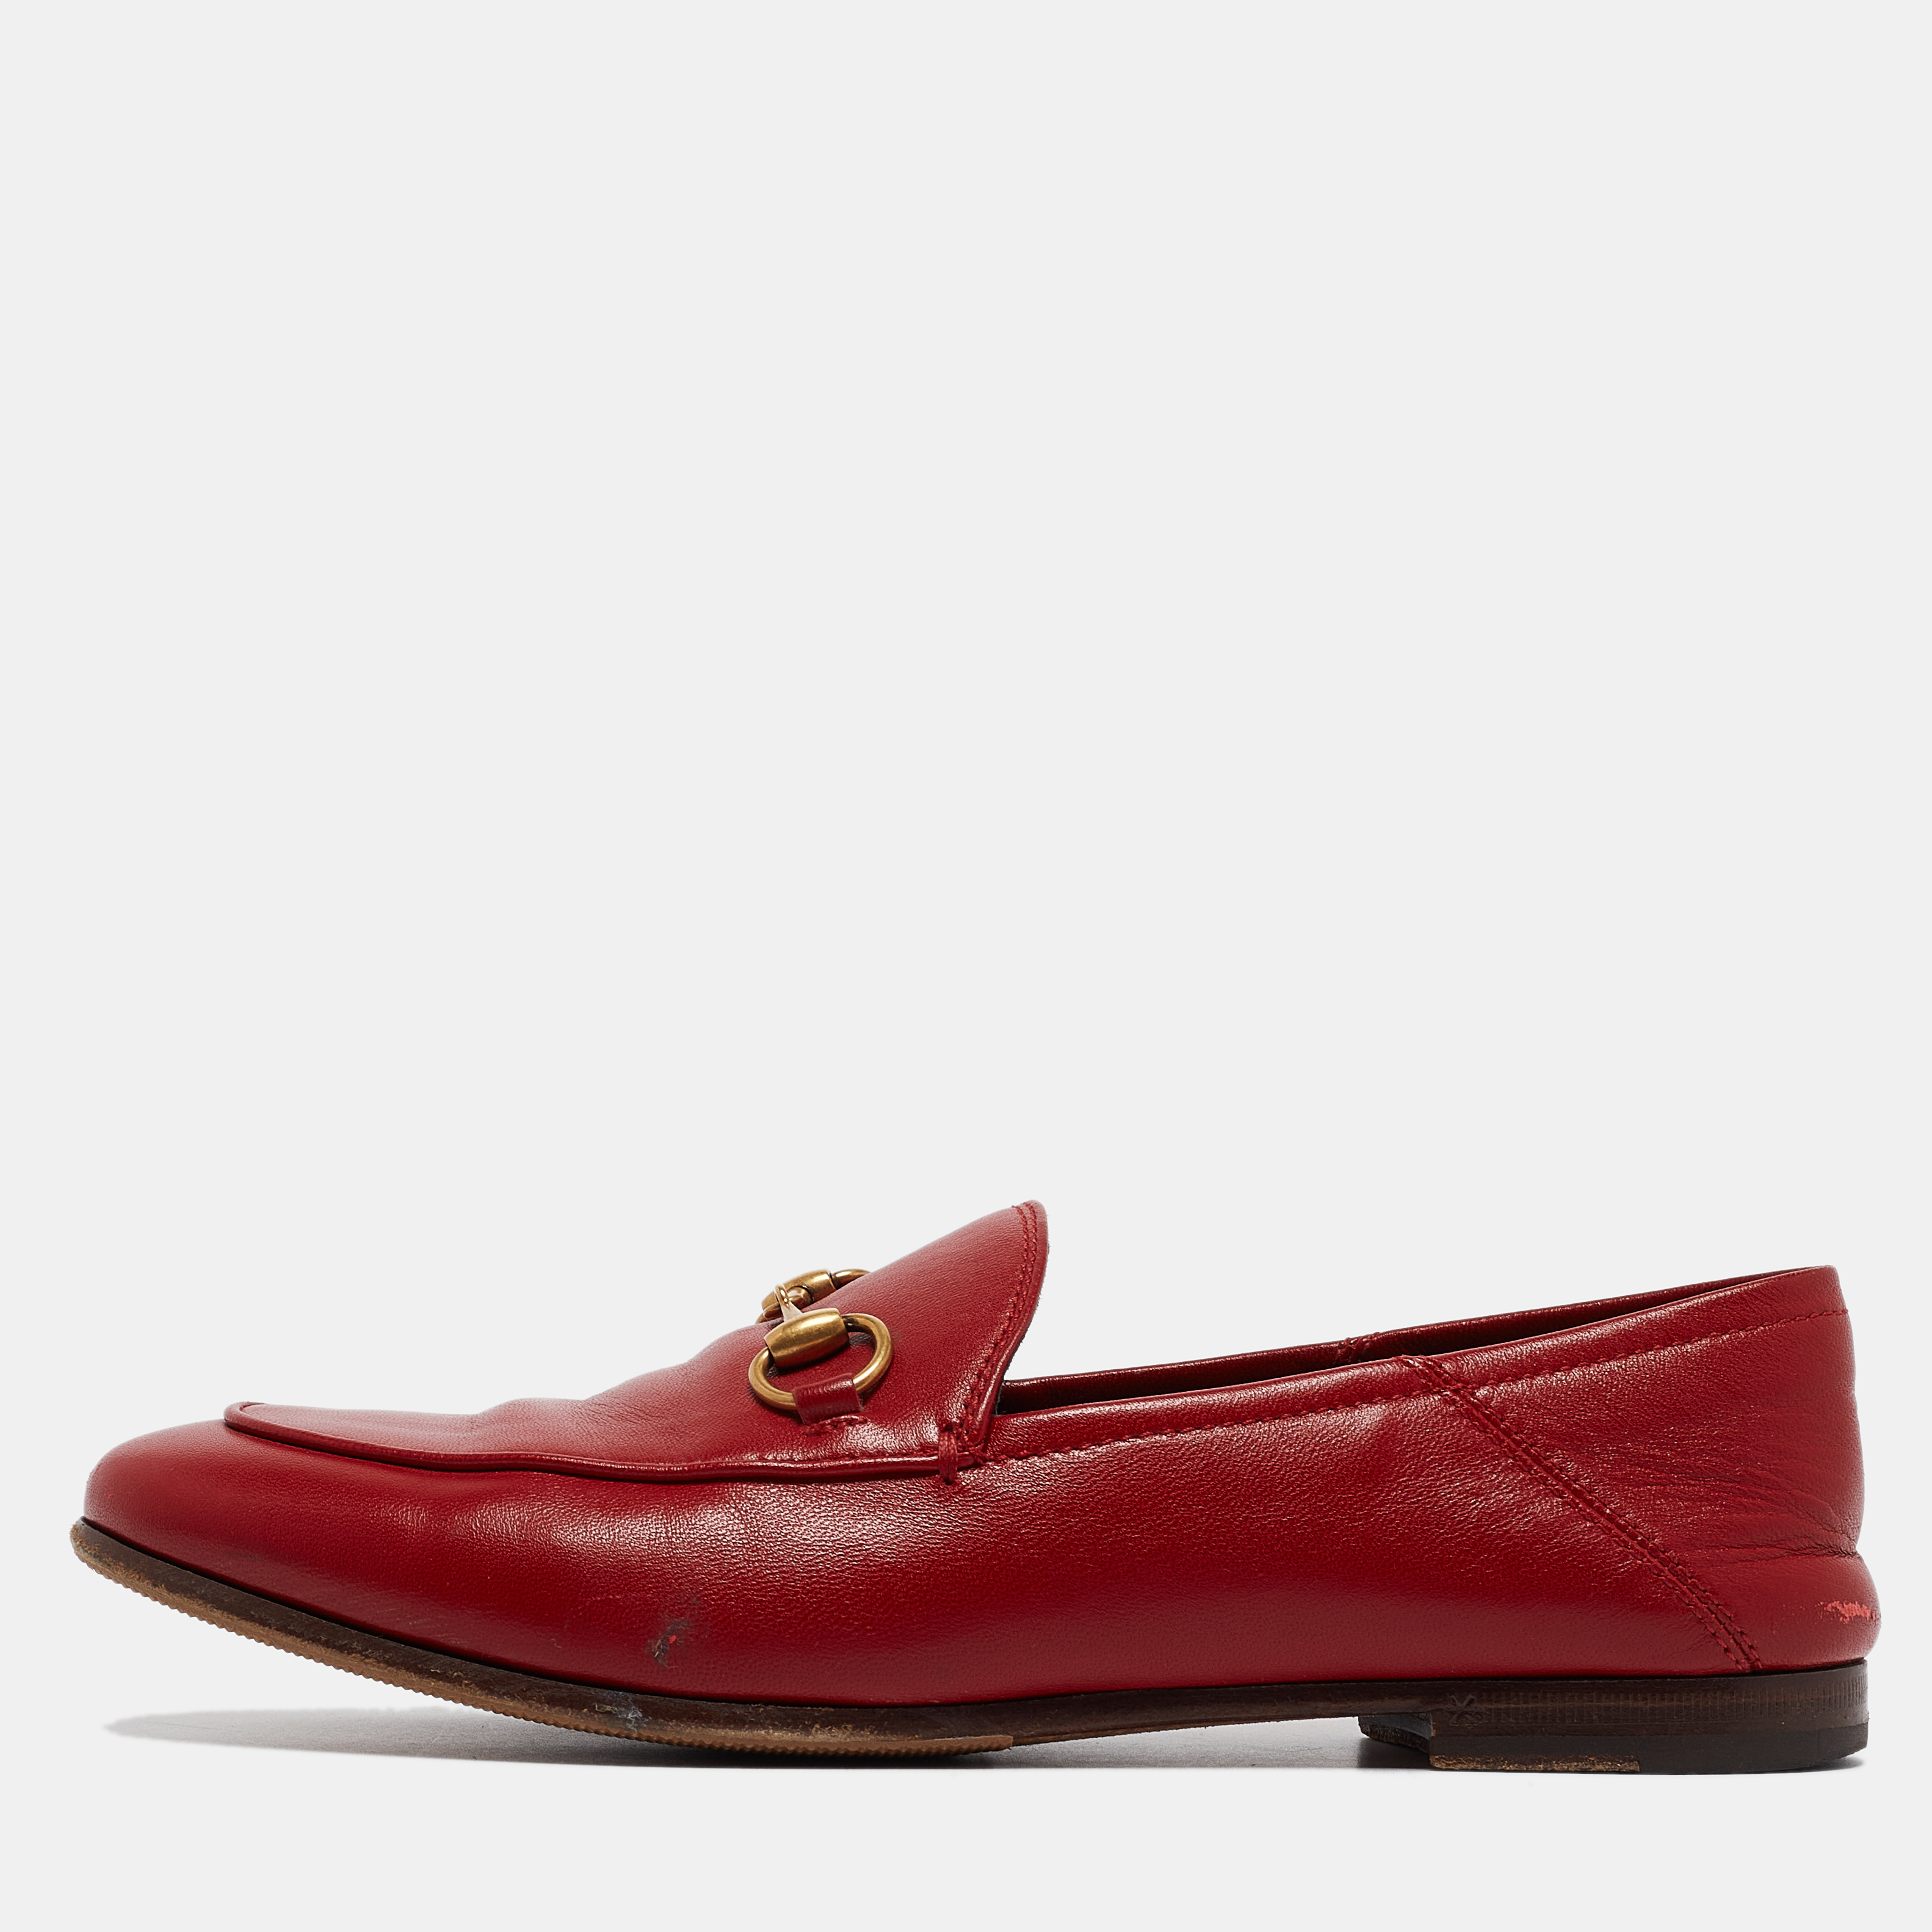 Gucci red leather jordaan loafers size 36